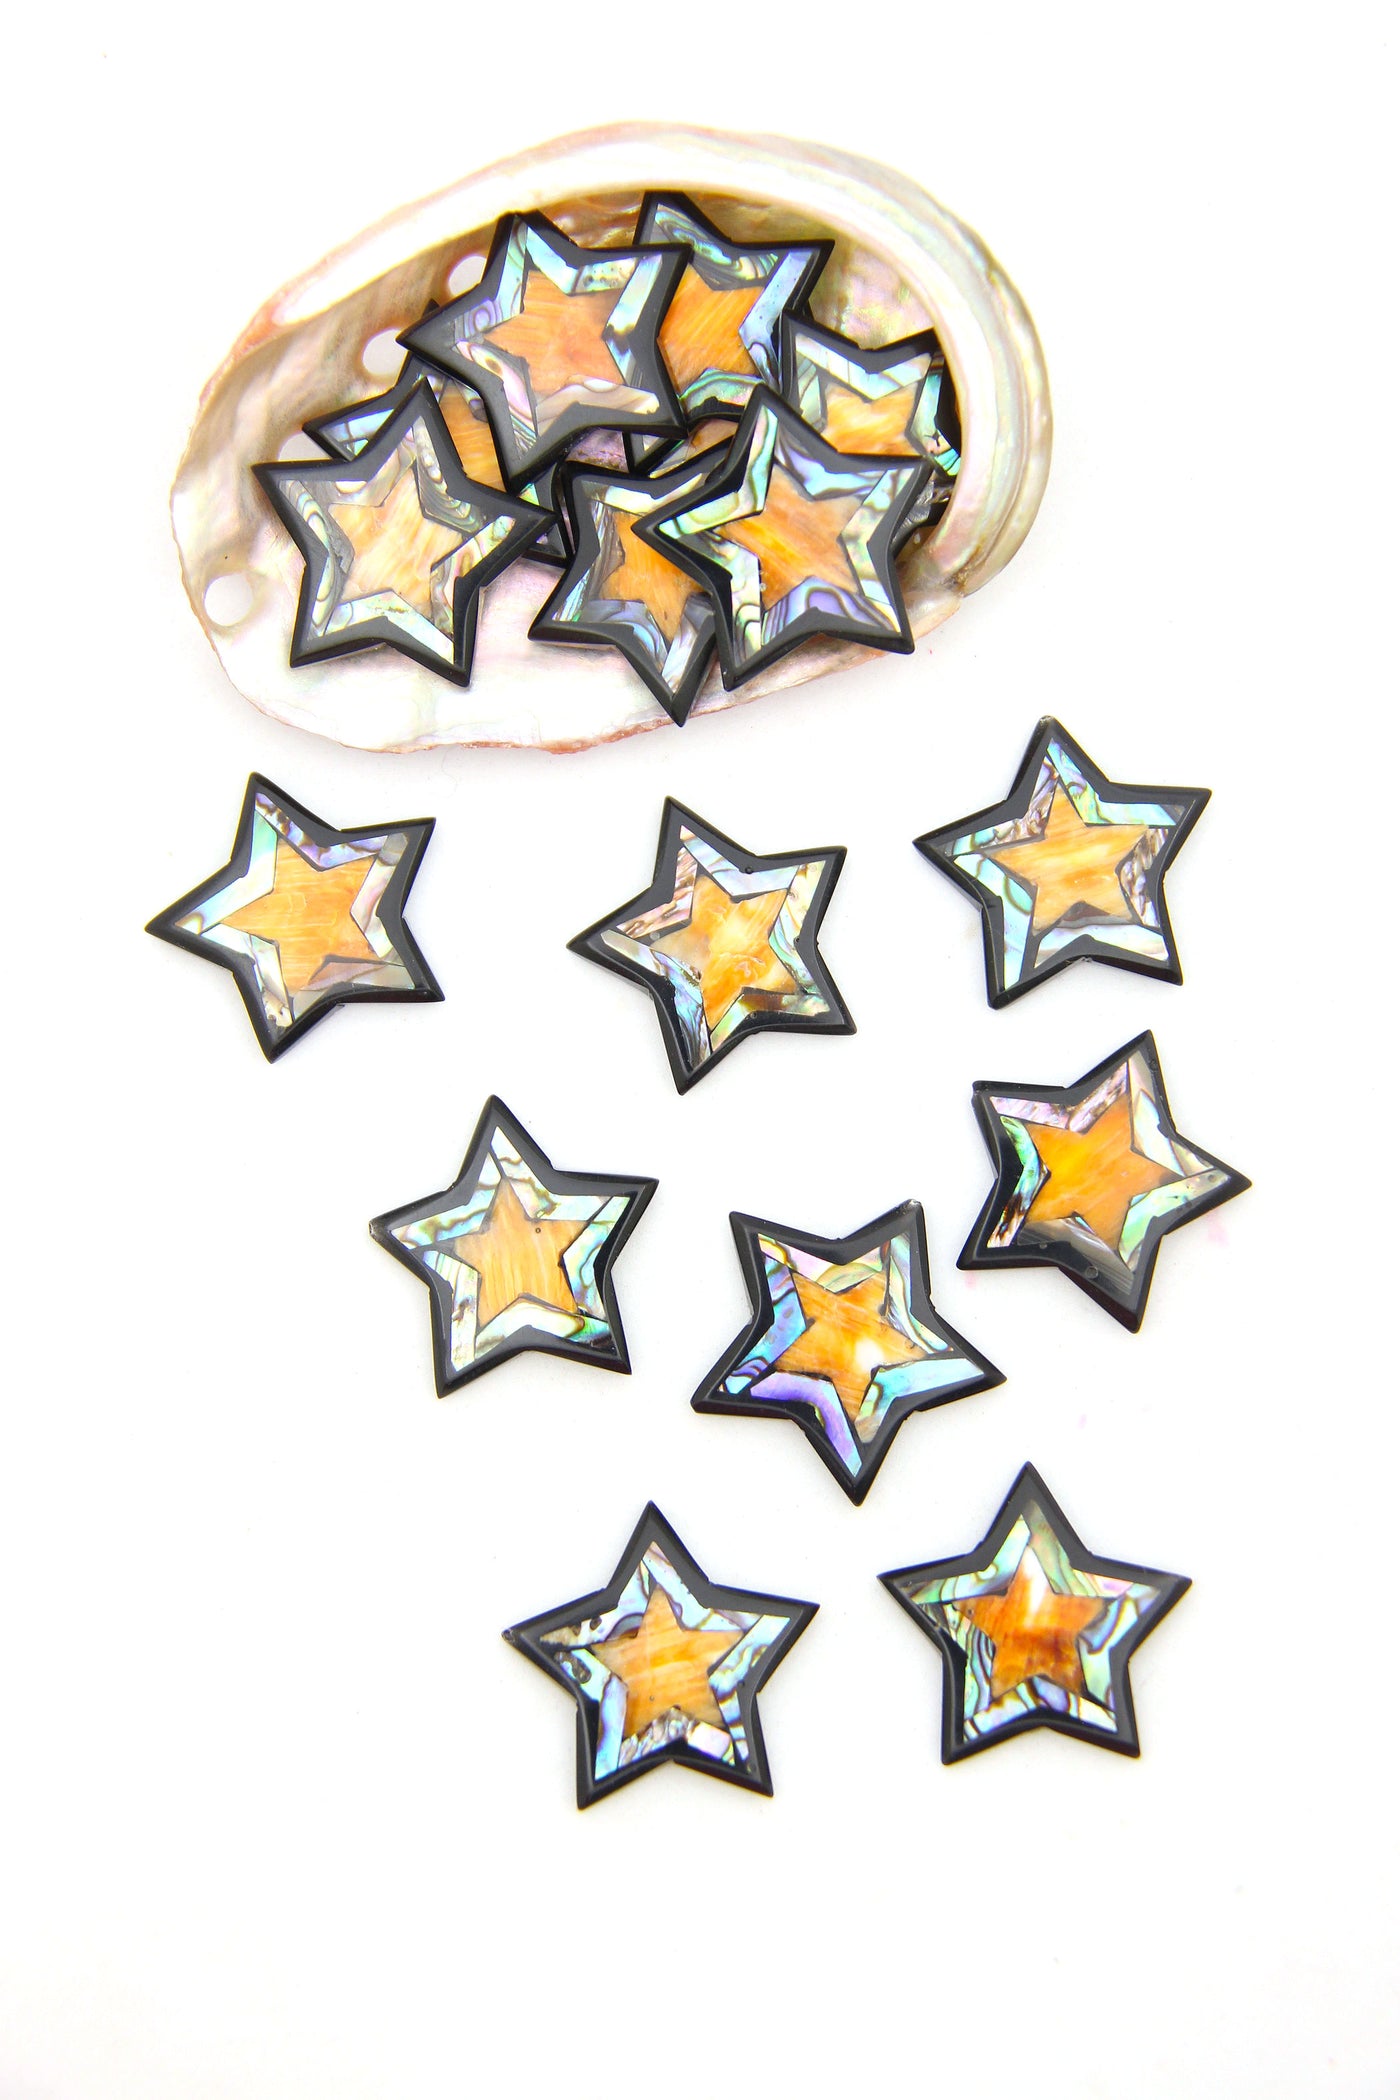 Star Shaped Ebony Wood, Abalone, and Spiny Oyster Inlaid Bead, 1 Charm